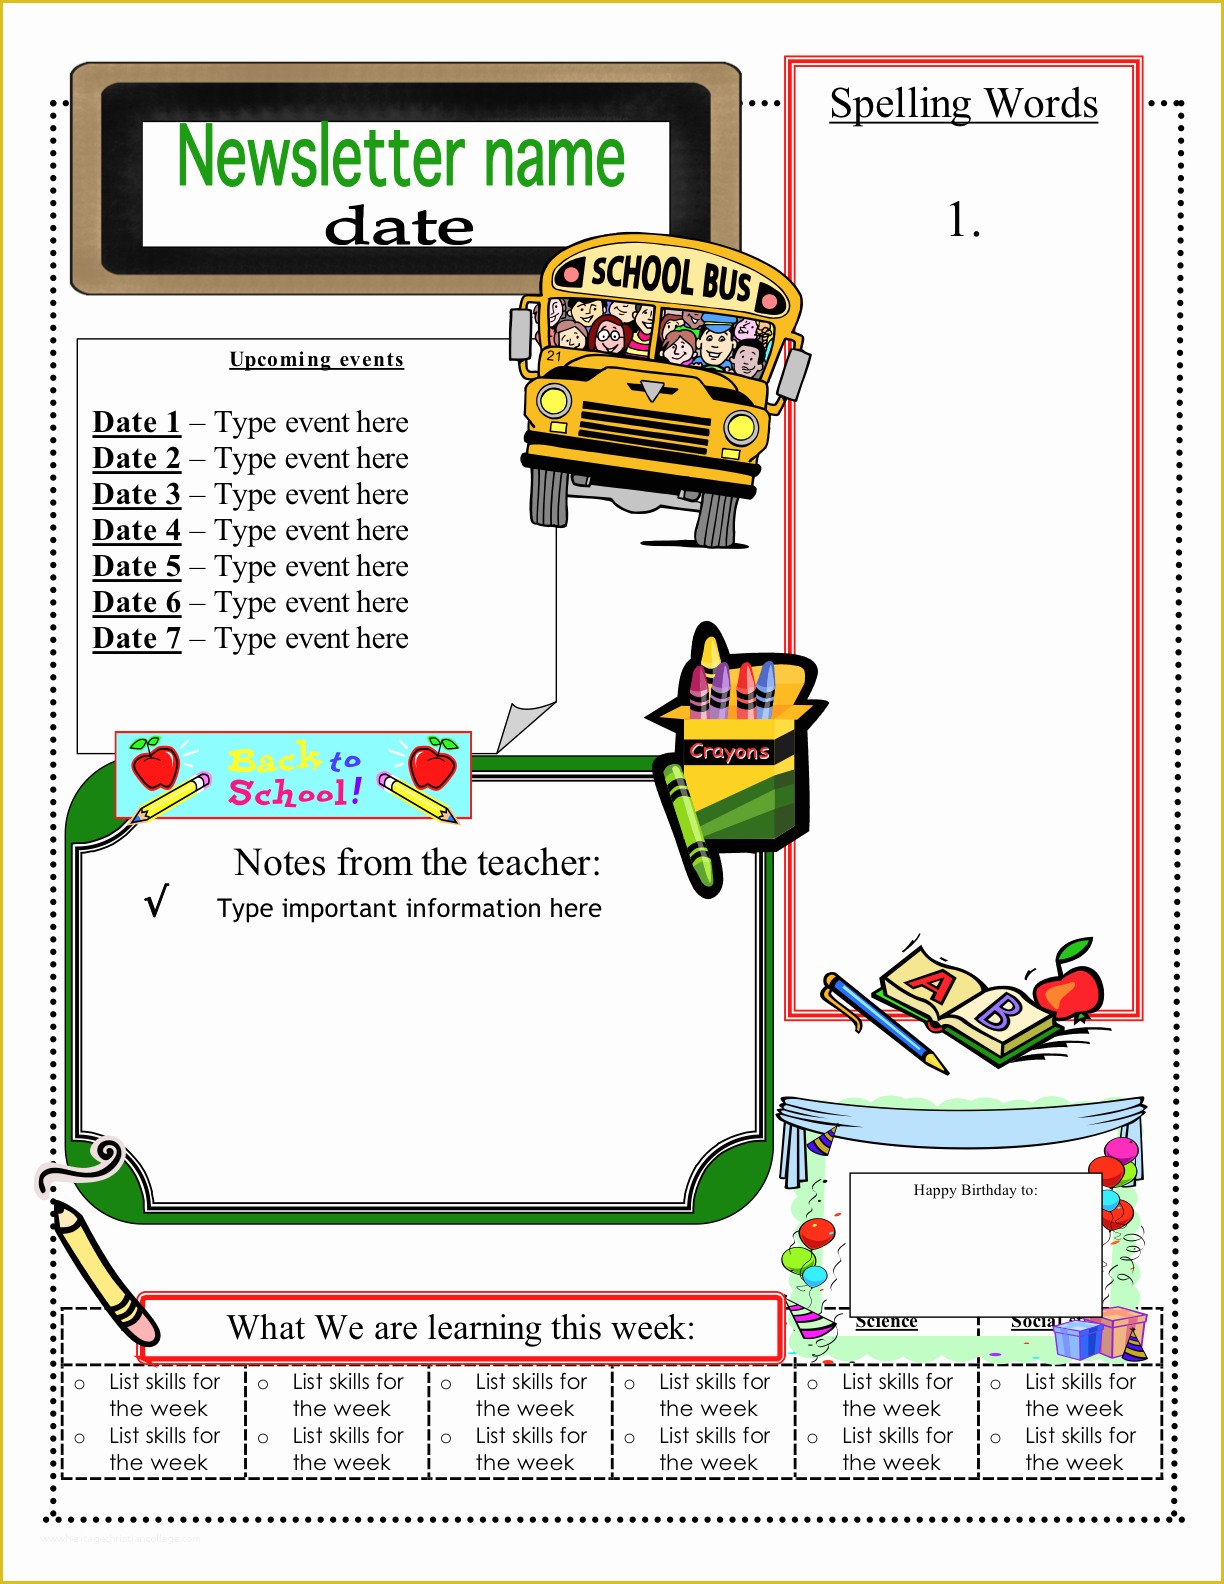 Free School Newsletter Templates Of Free Classroom Newsletter Templates Check Out these Eight